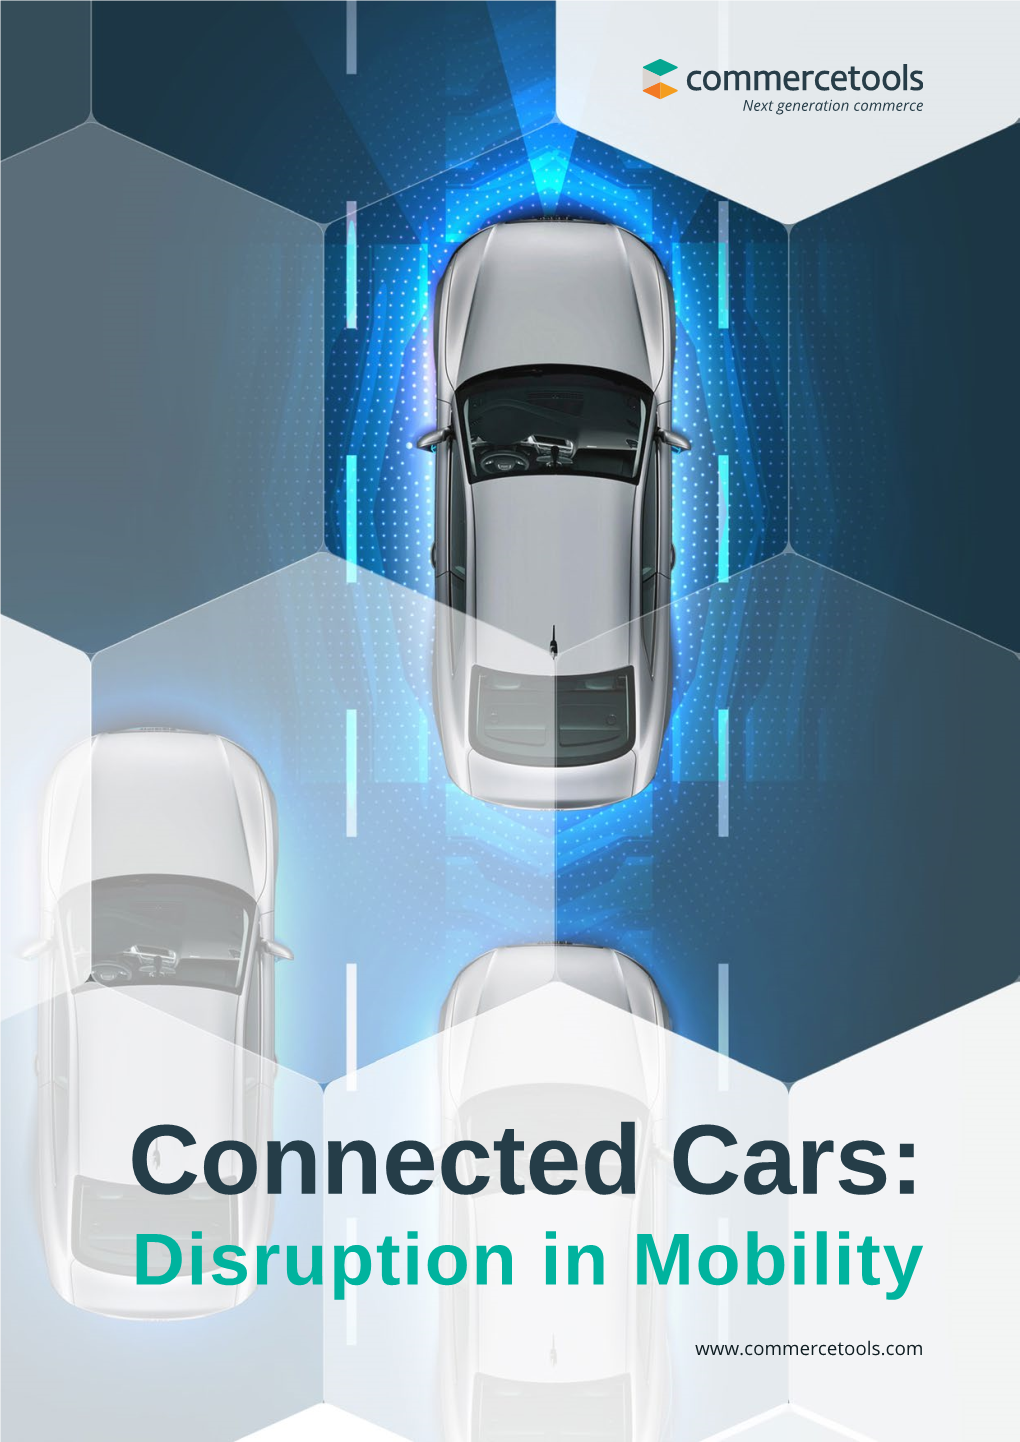 Connected Cars: Disruption in Mobility